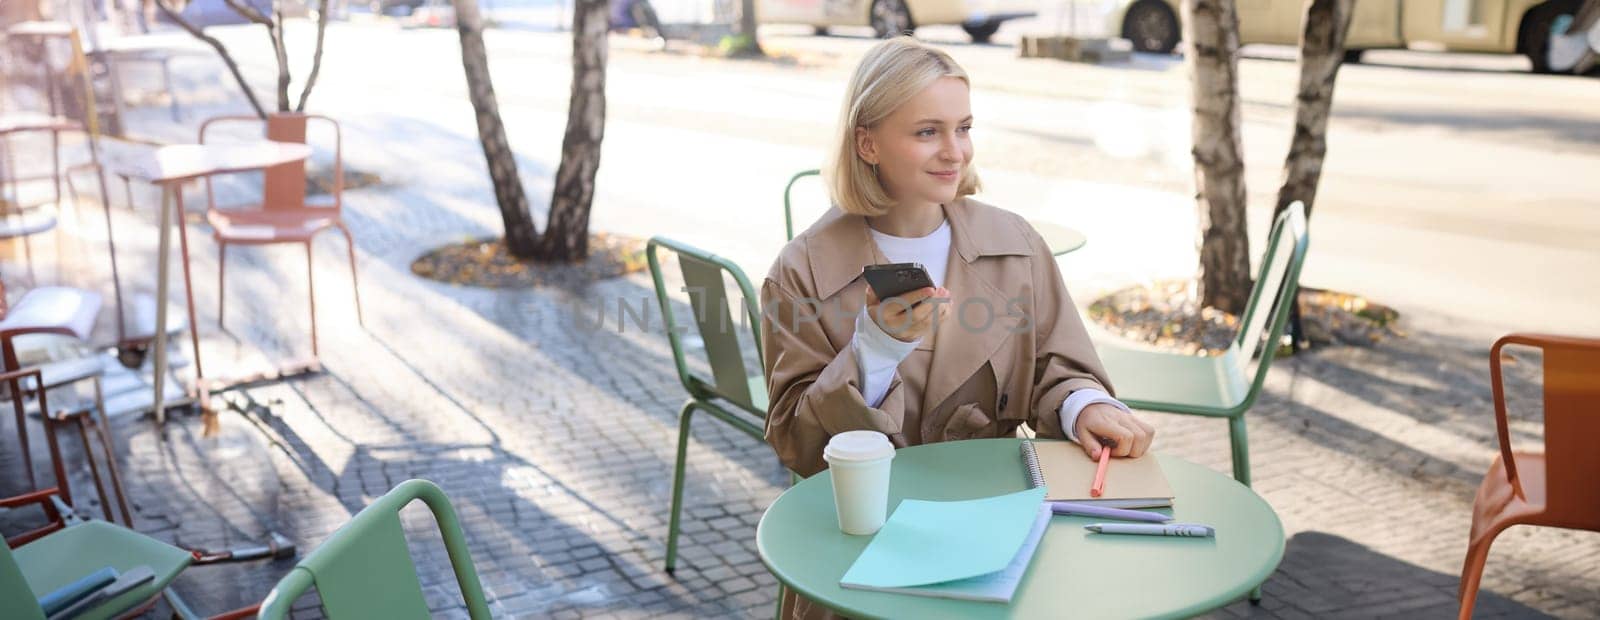 Image of young beautiful girl, student studying, doing homework in cafe, using mobile phone, holding smartphone, smiling.